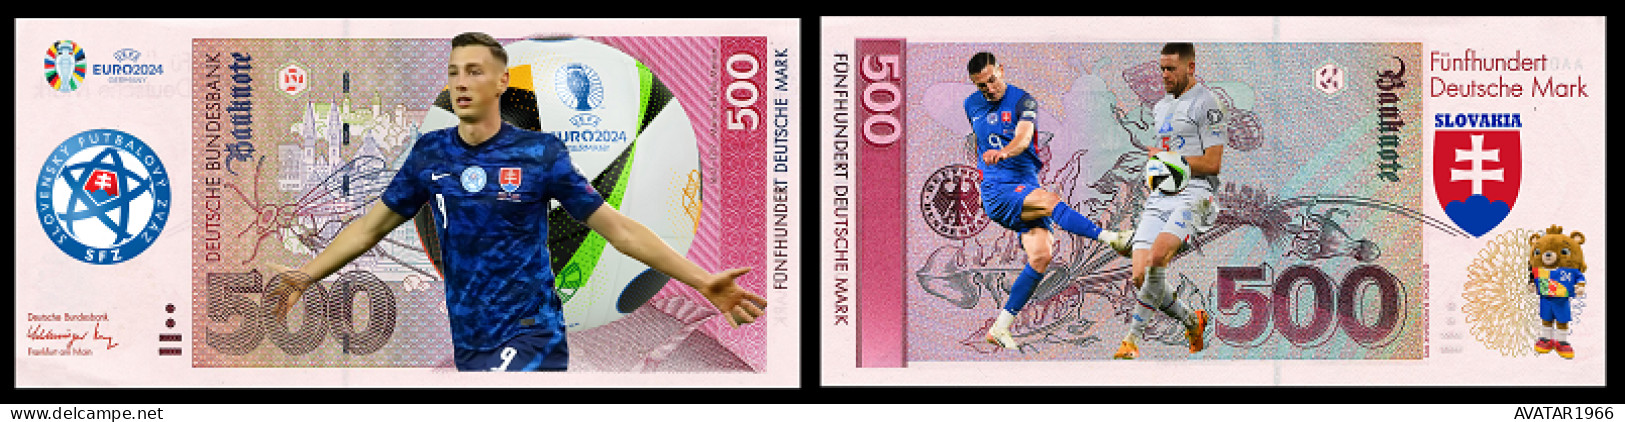 UEFA European Football Championship 2024 qualified country Slovakia  8 pieces Germany fantasy paper money